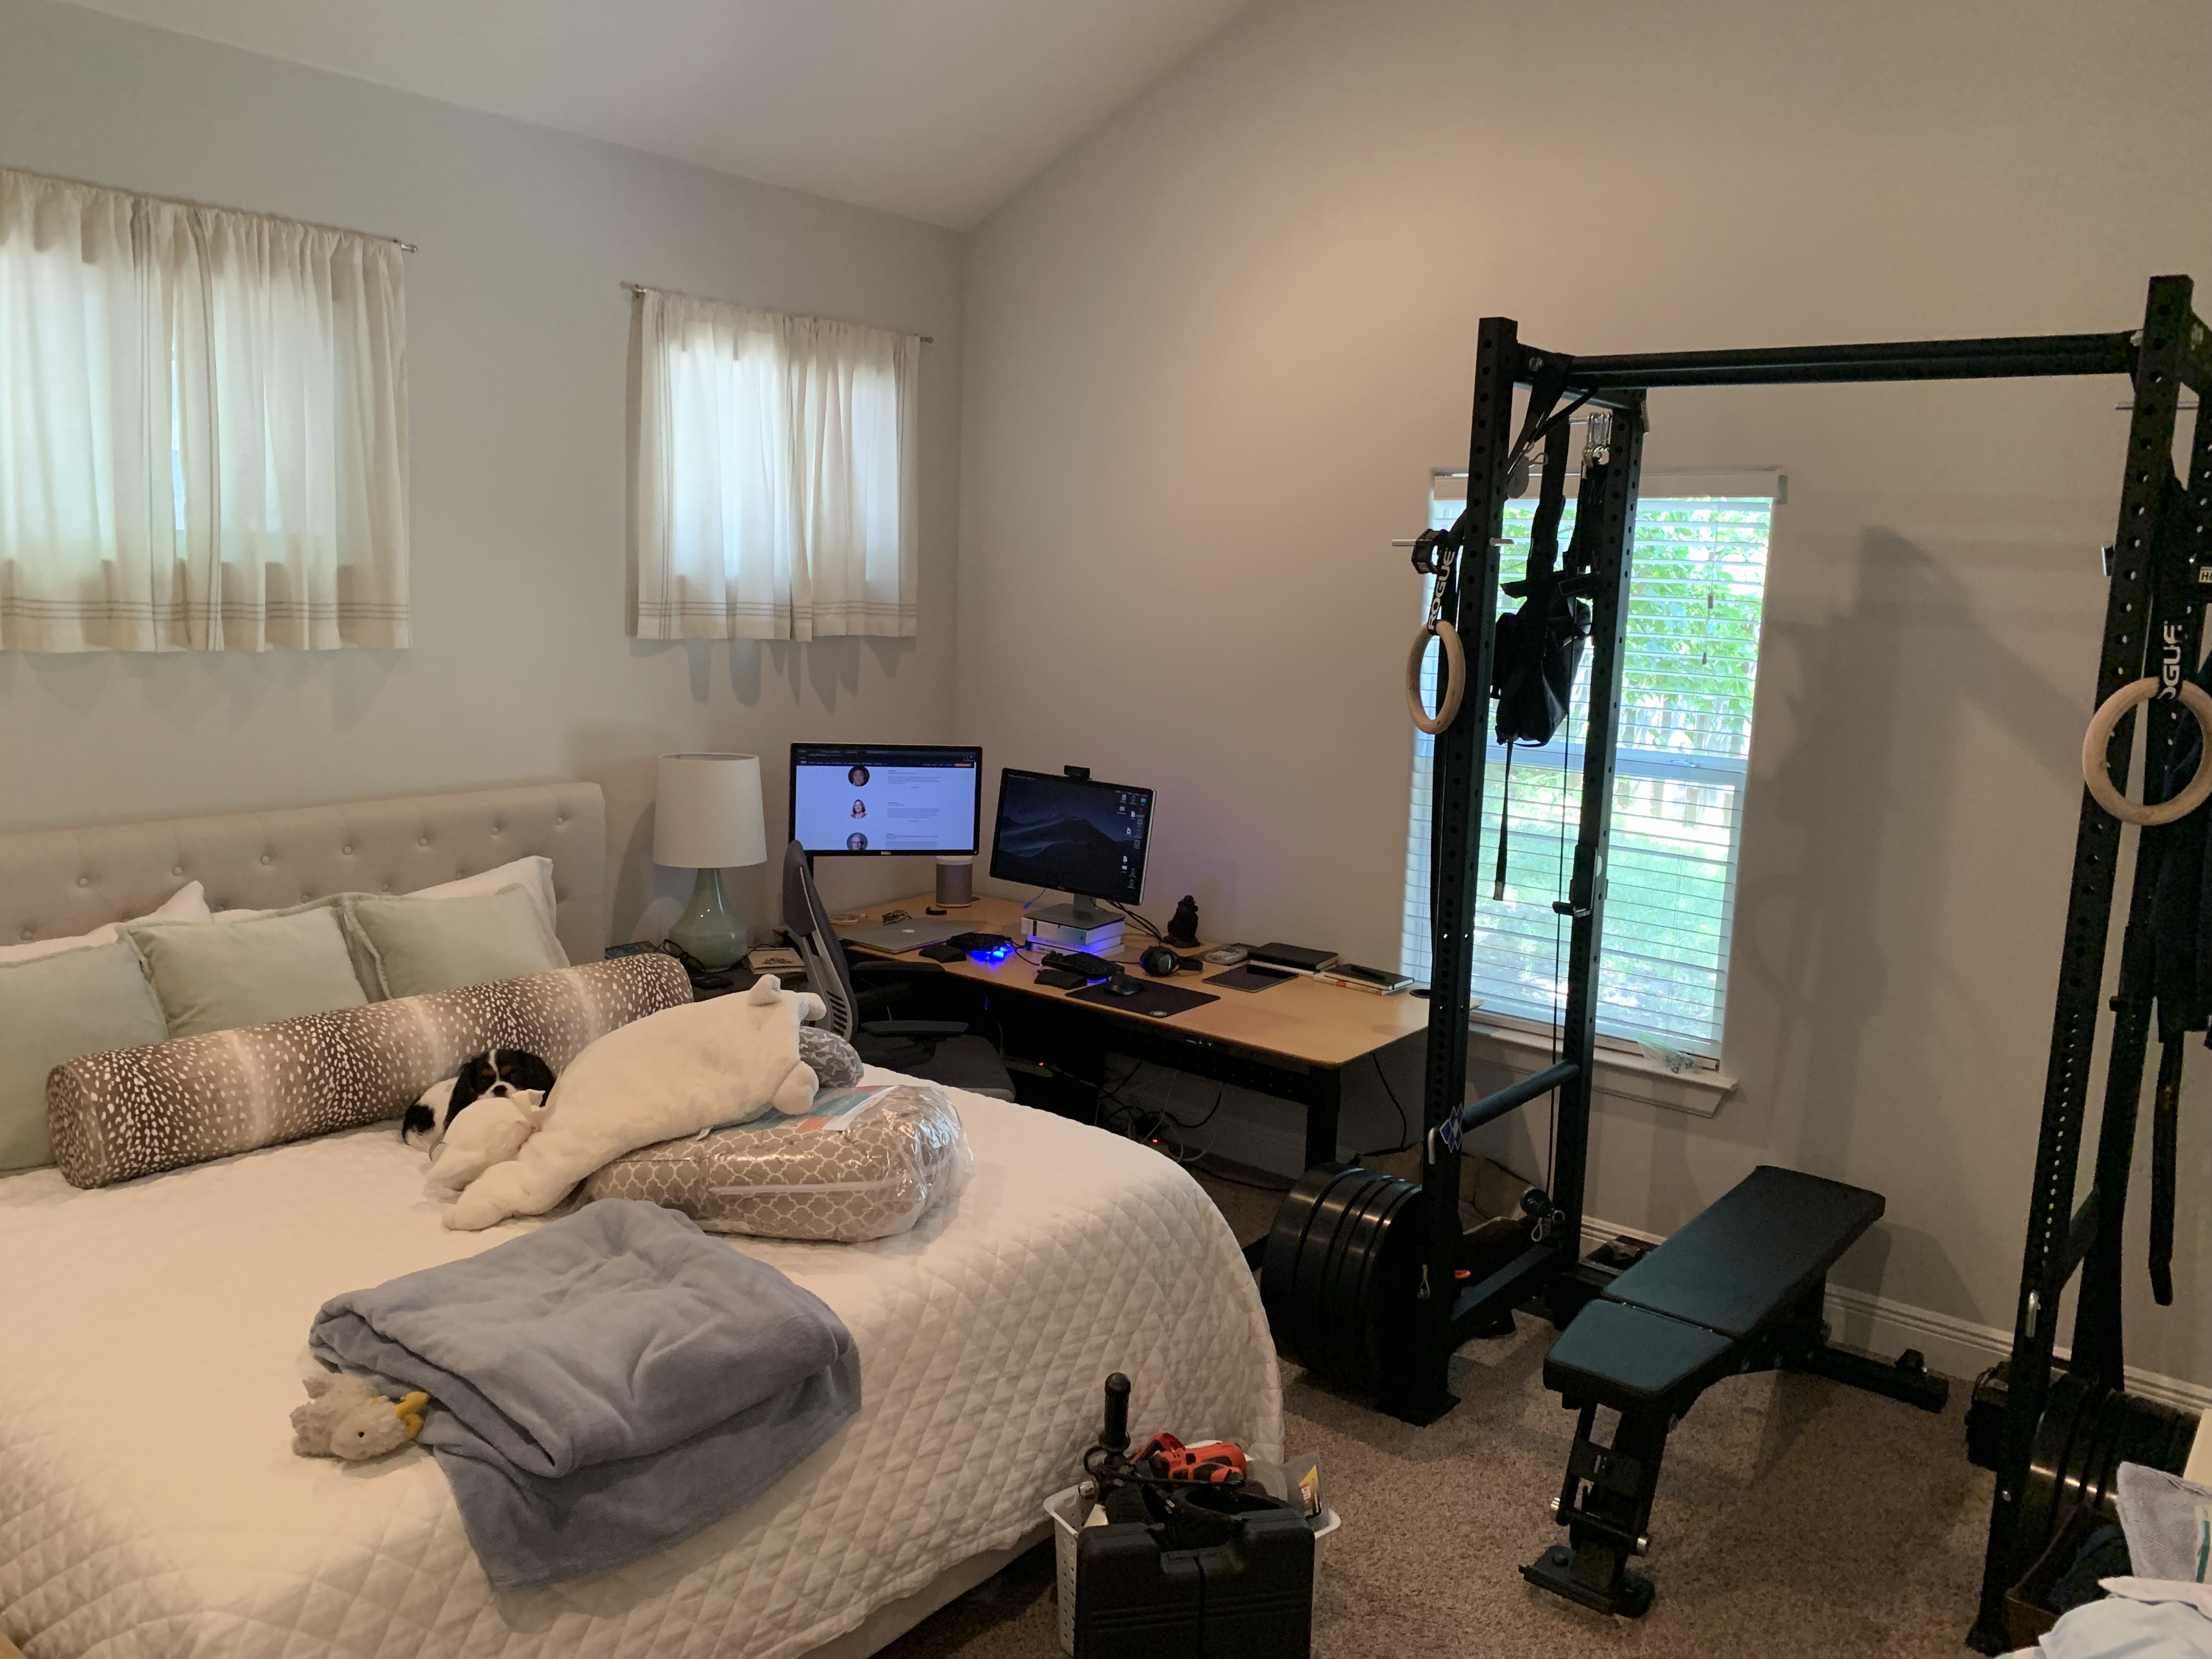 squat cage in crowded bedroom next to huge desk